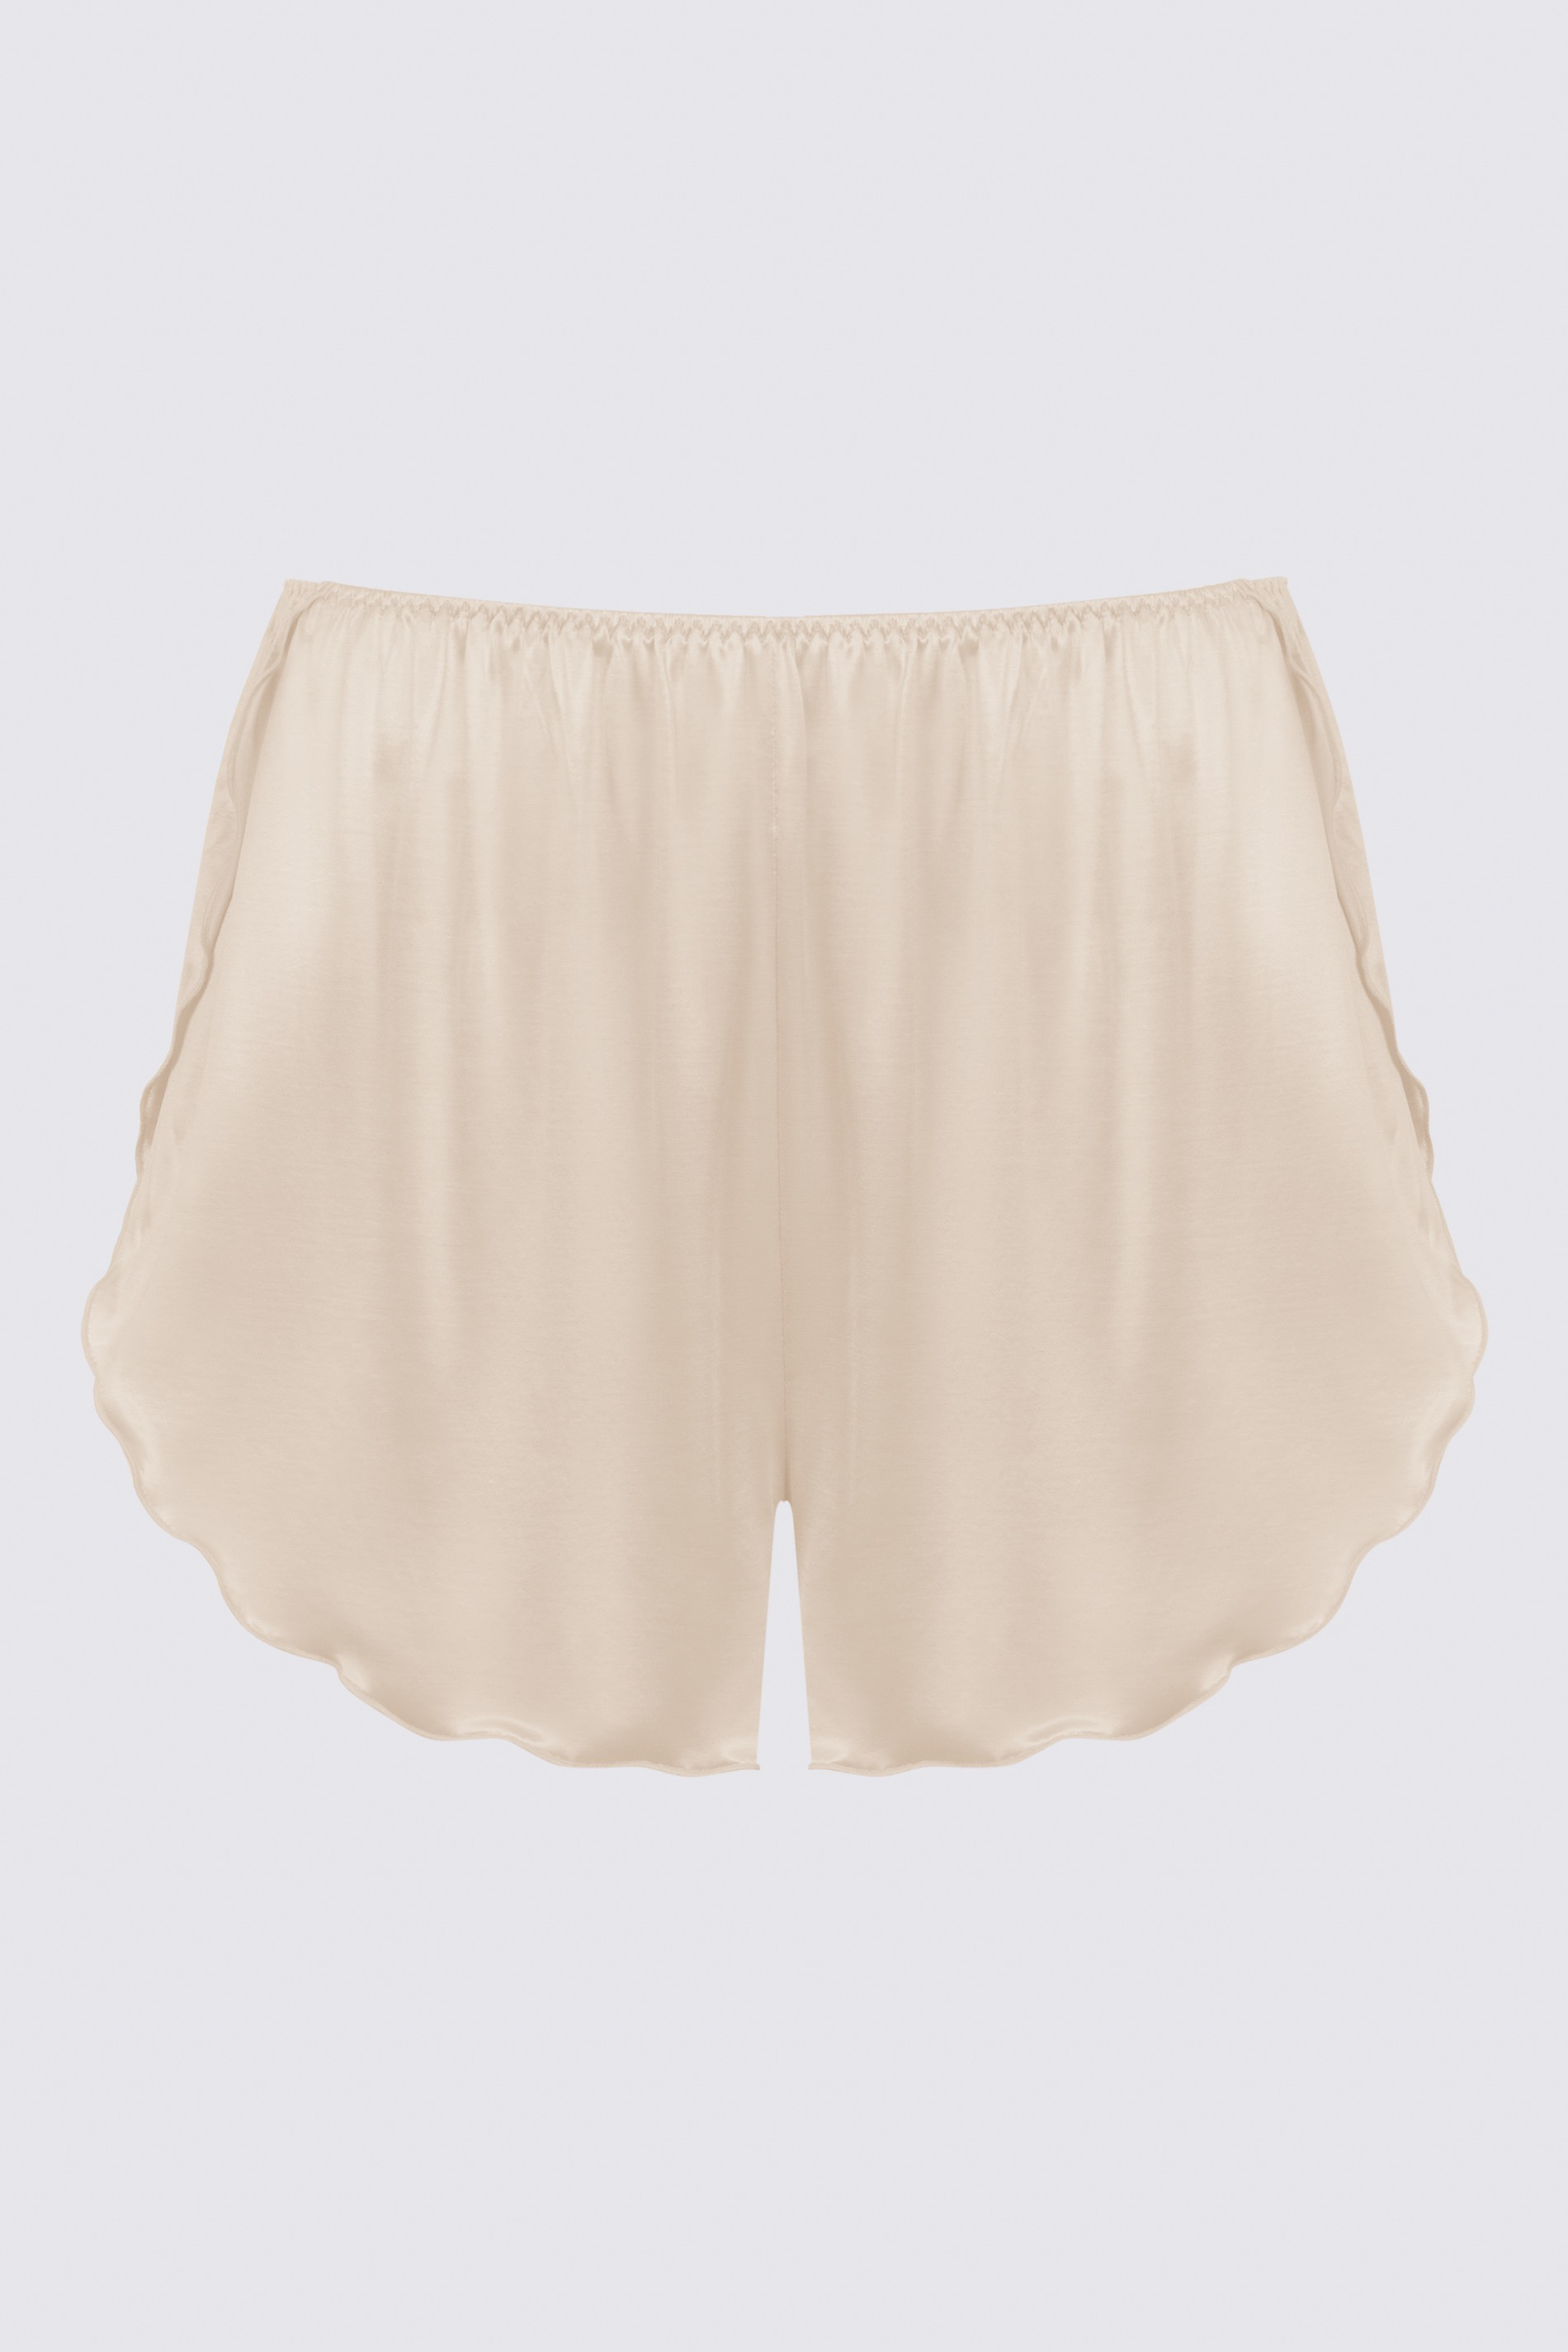 French knickers Serie Coco Uitknippen | mey®